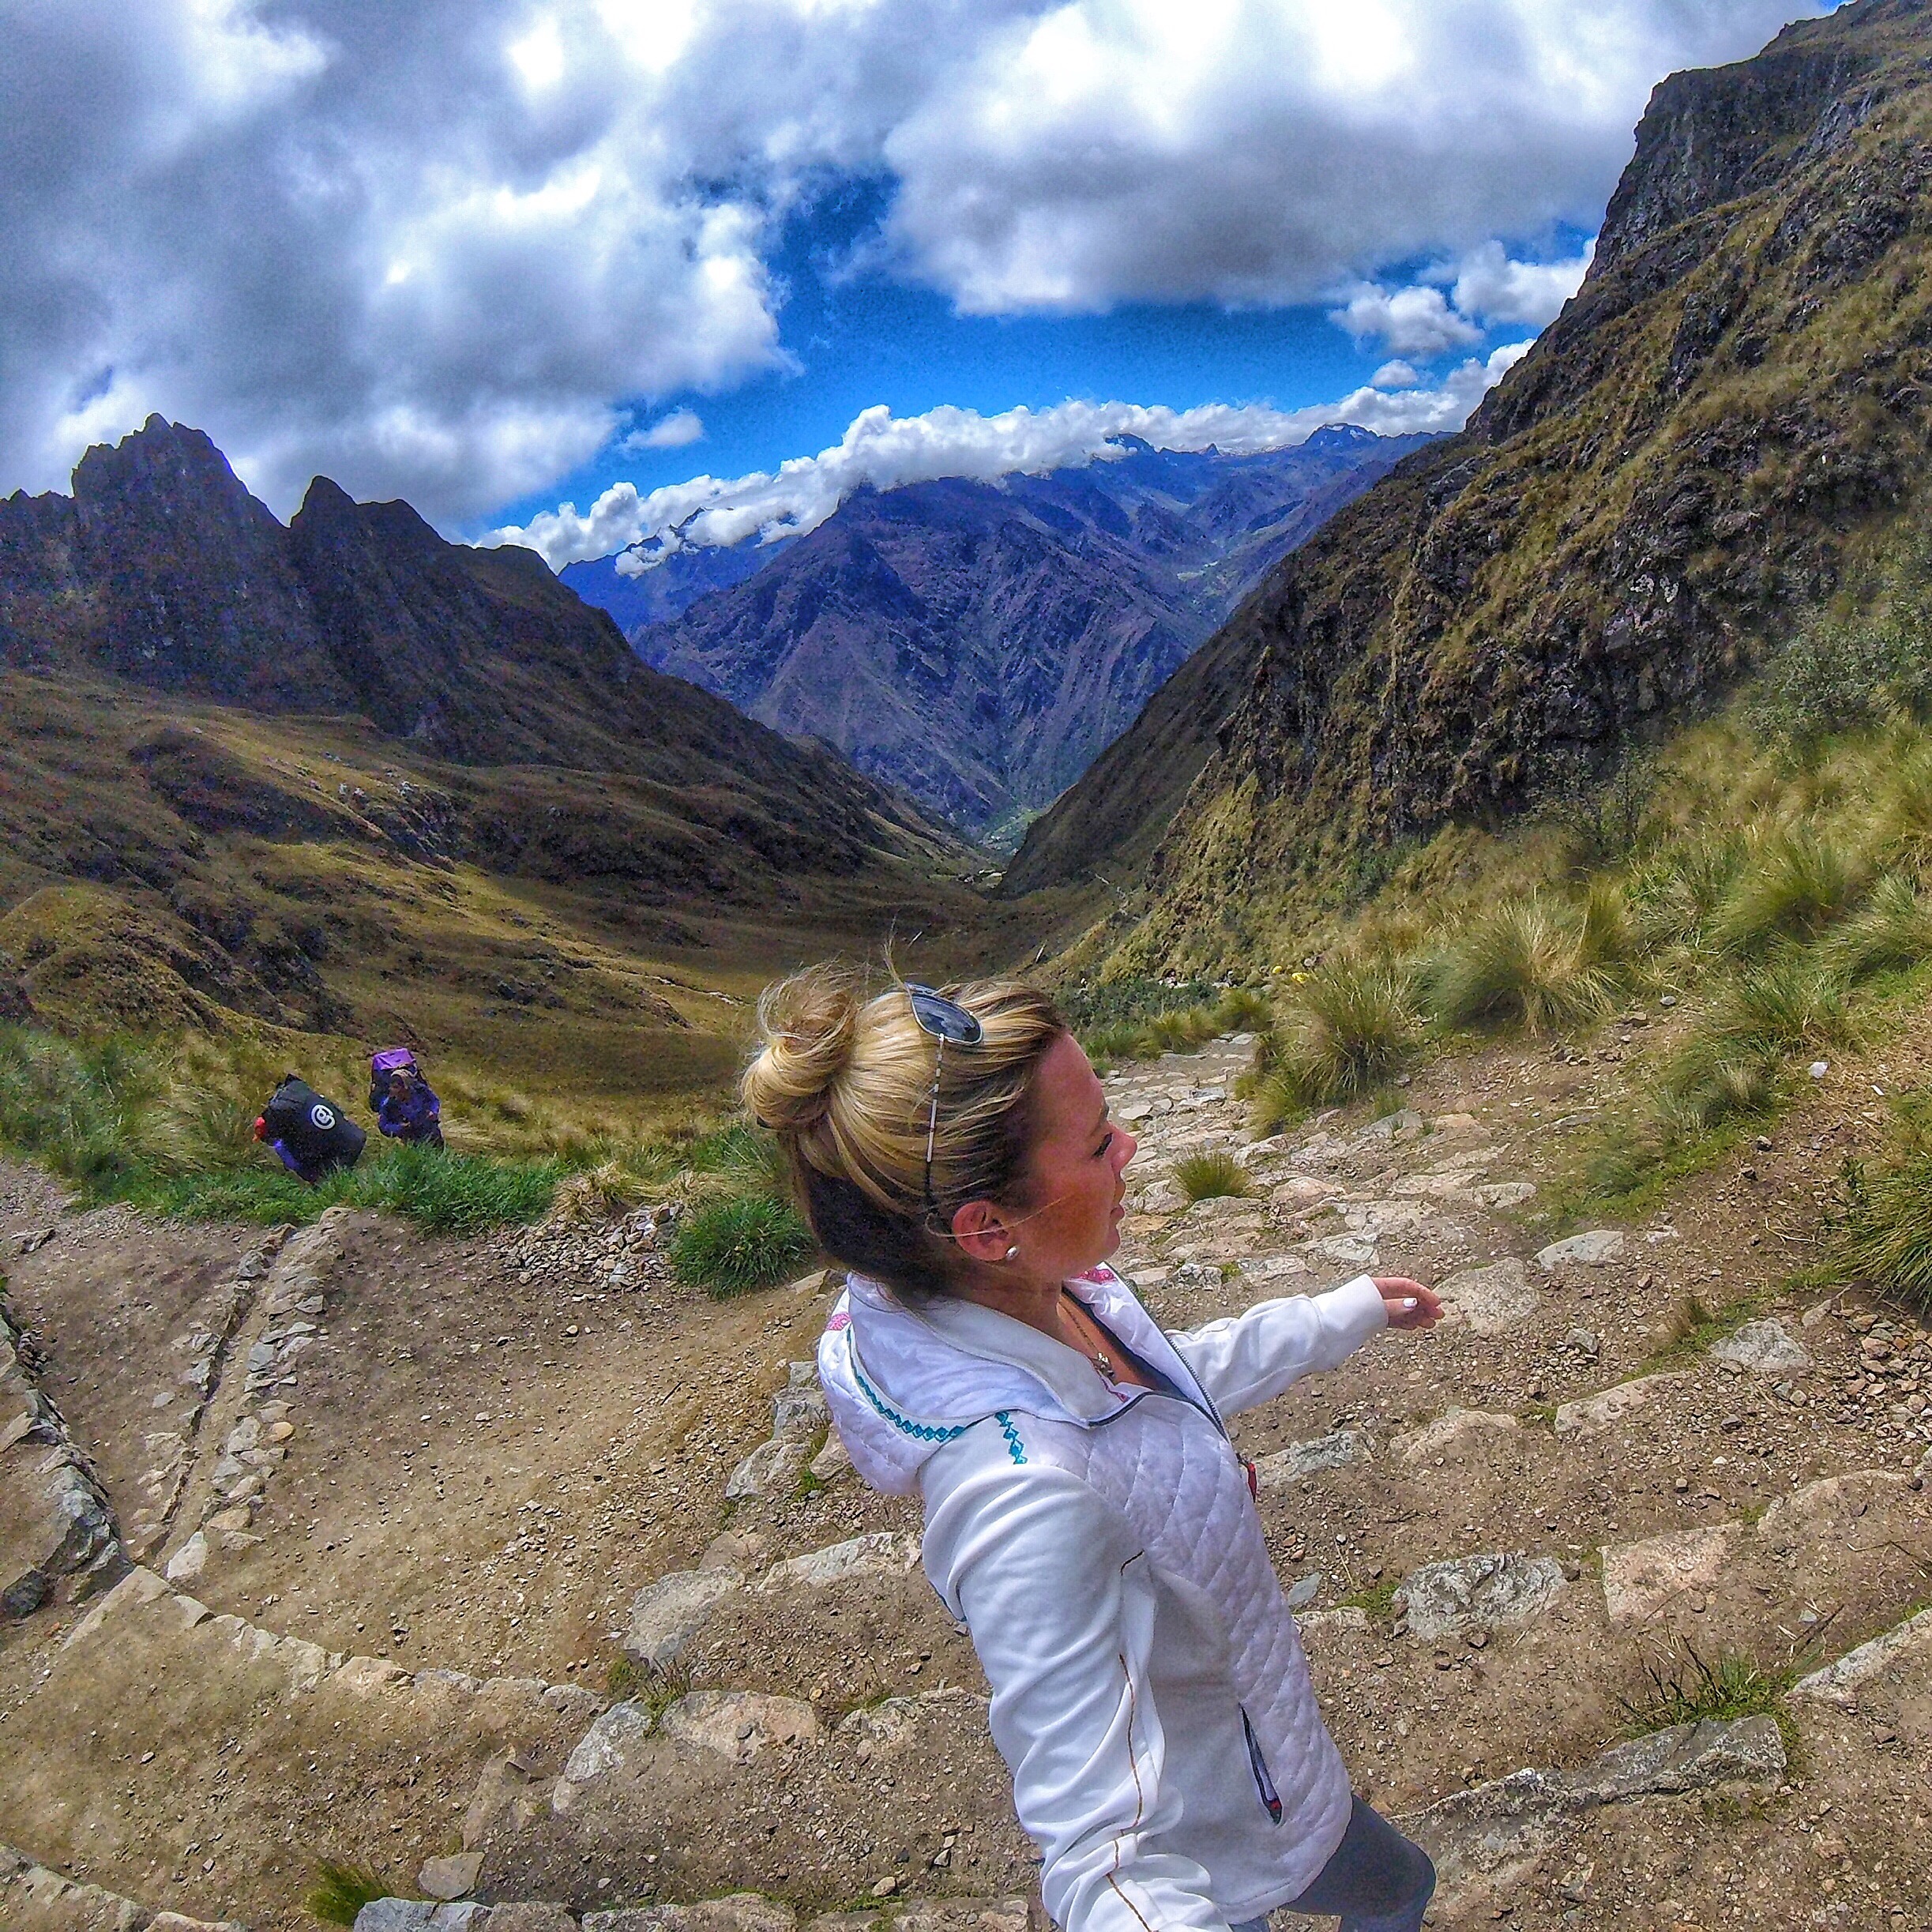 15 Incredible Sites You'll Only See if You Hike the Inca Trail